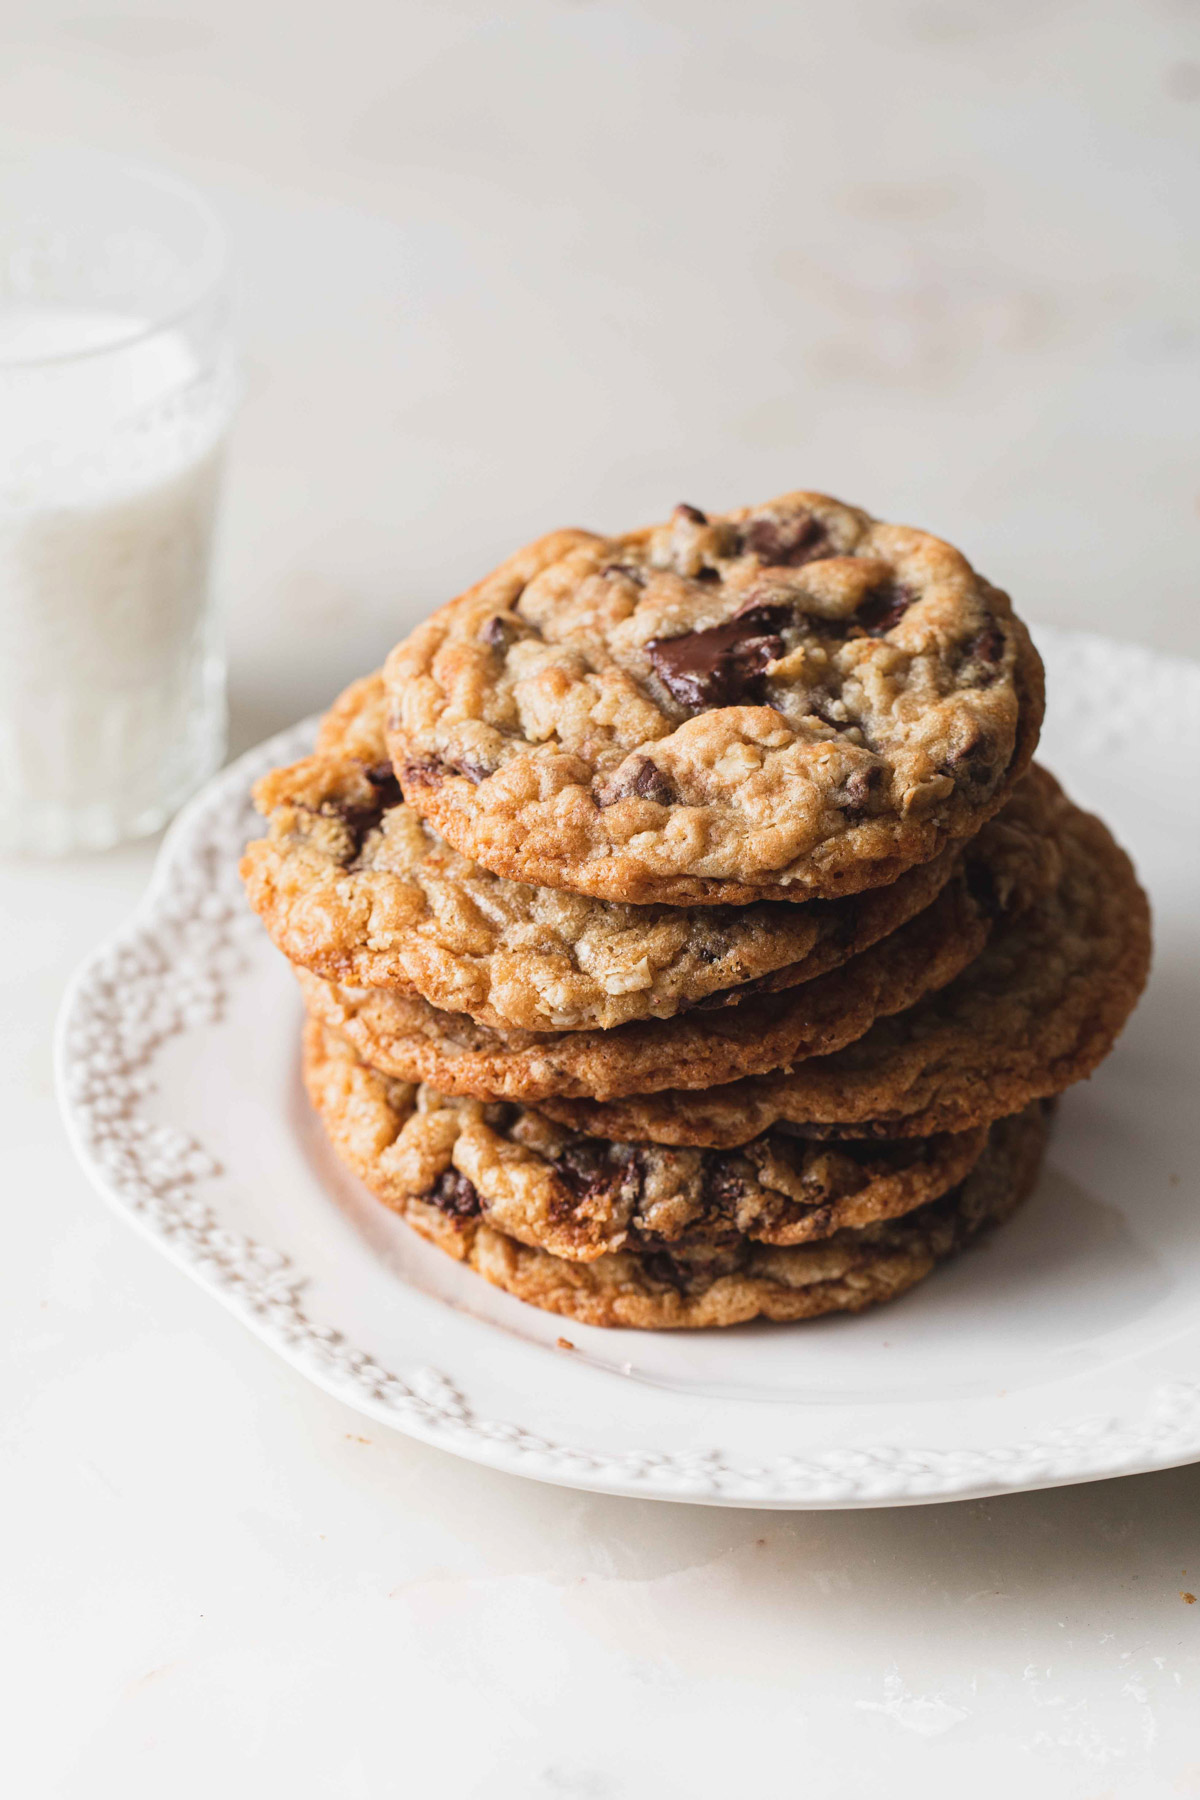 A stack of baked Nutella Stuffed Oatmeal Cookies